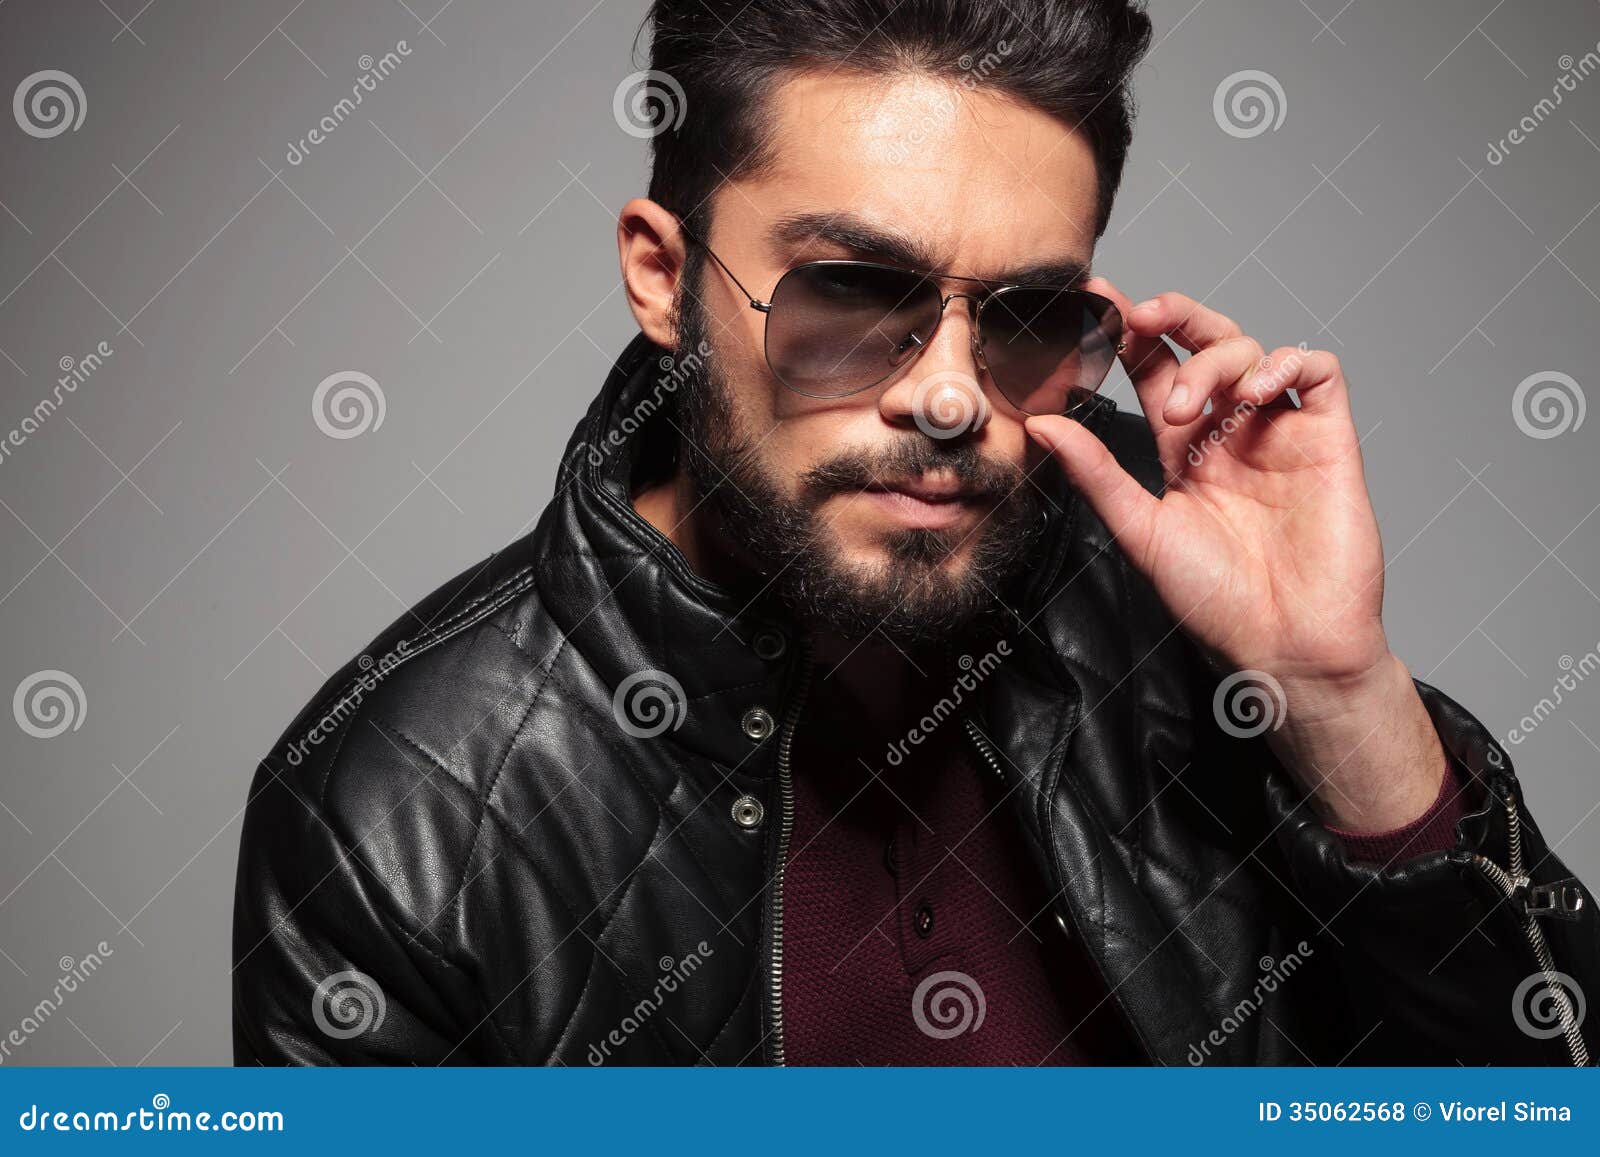 Man With Long Beard Fixing Or Putting On His Sunglasses 